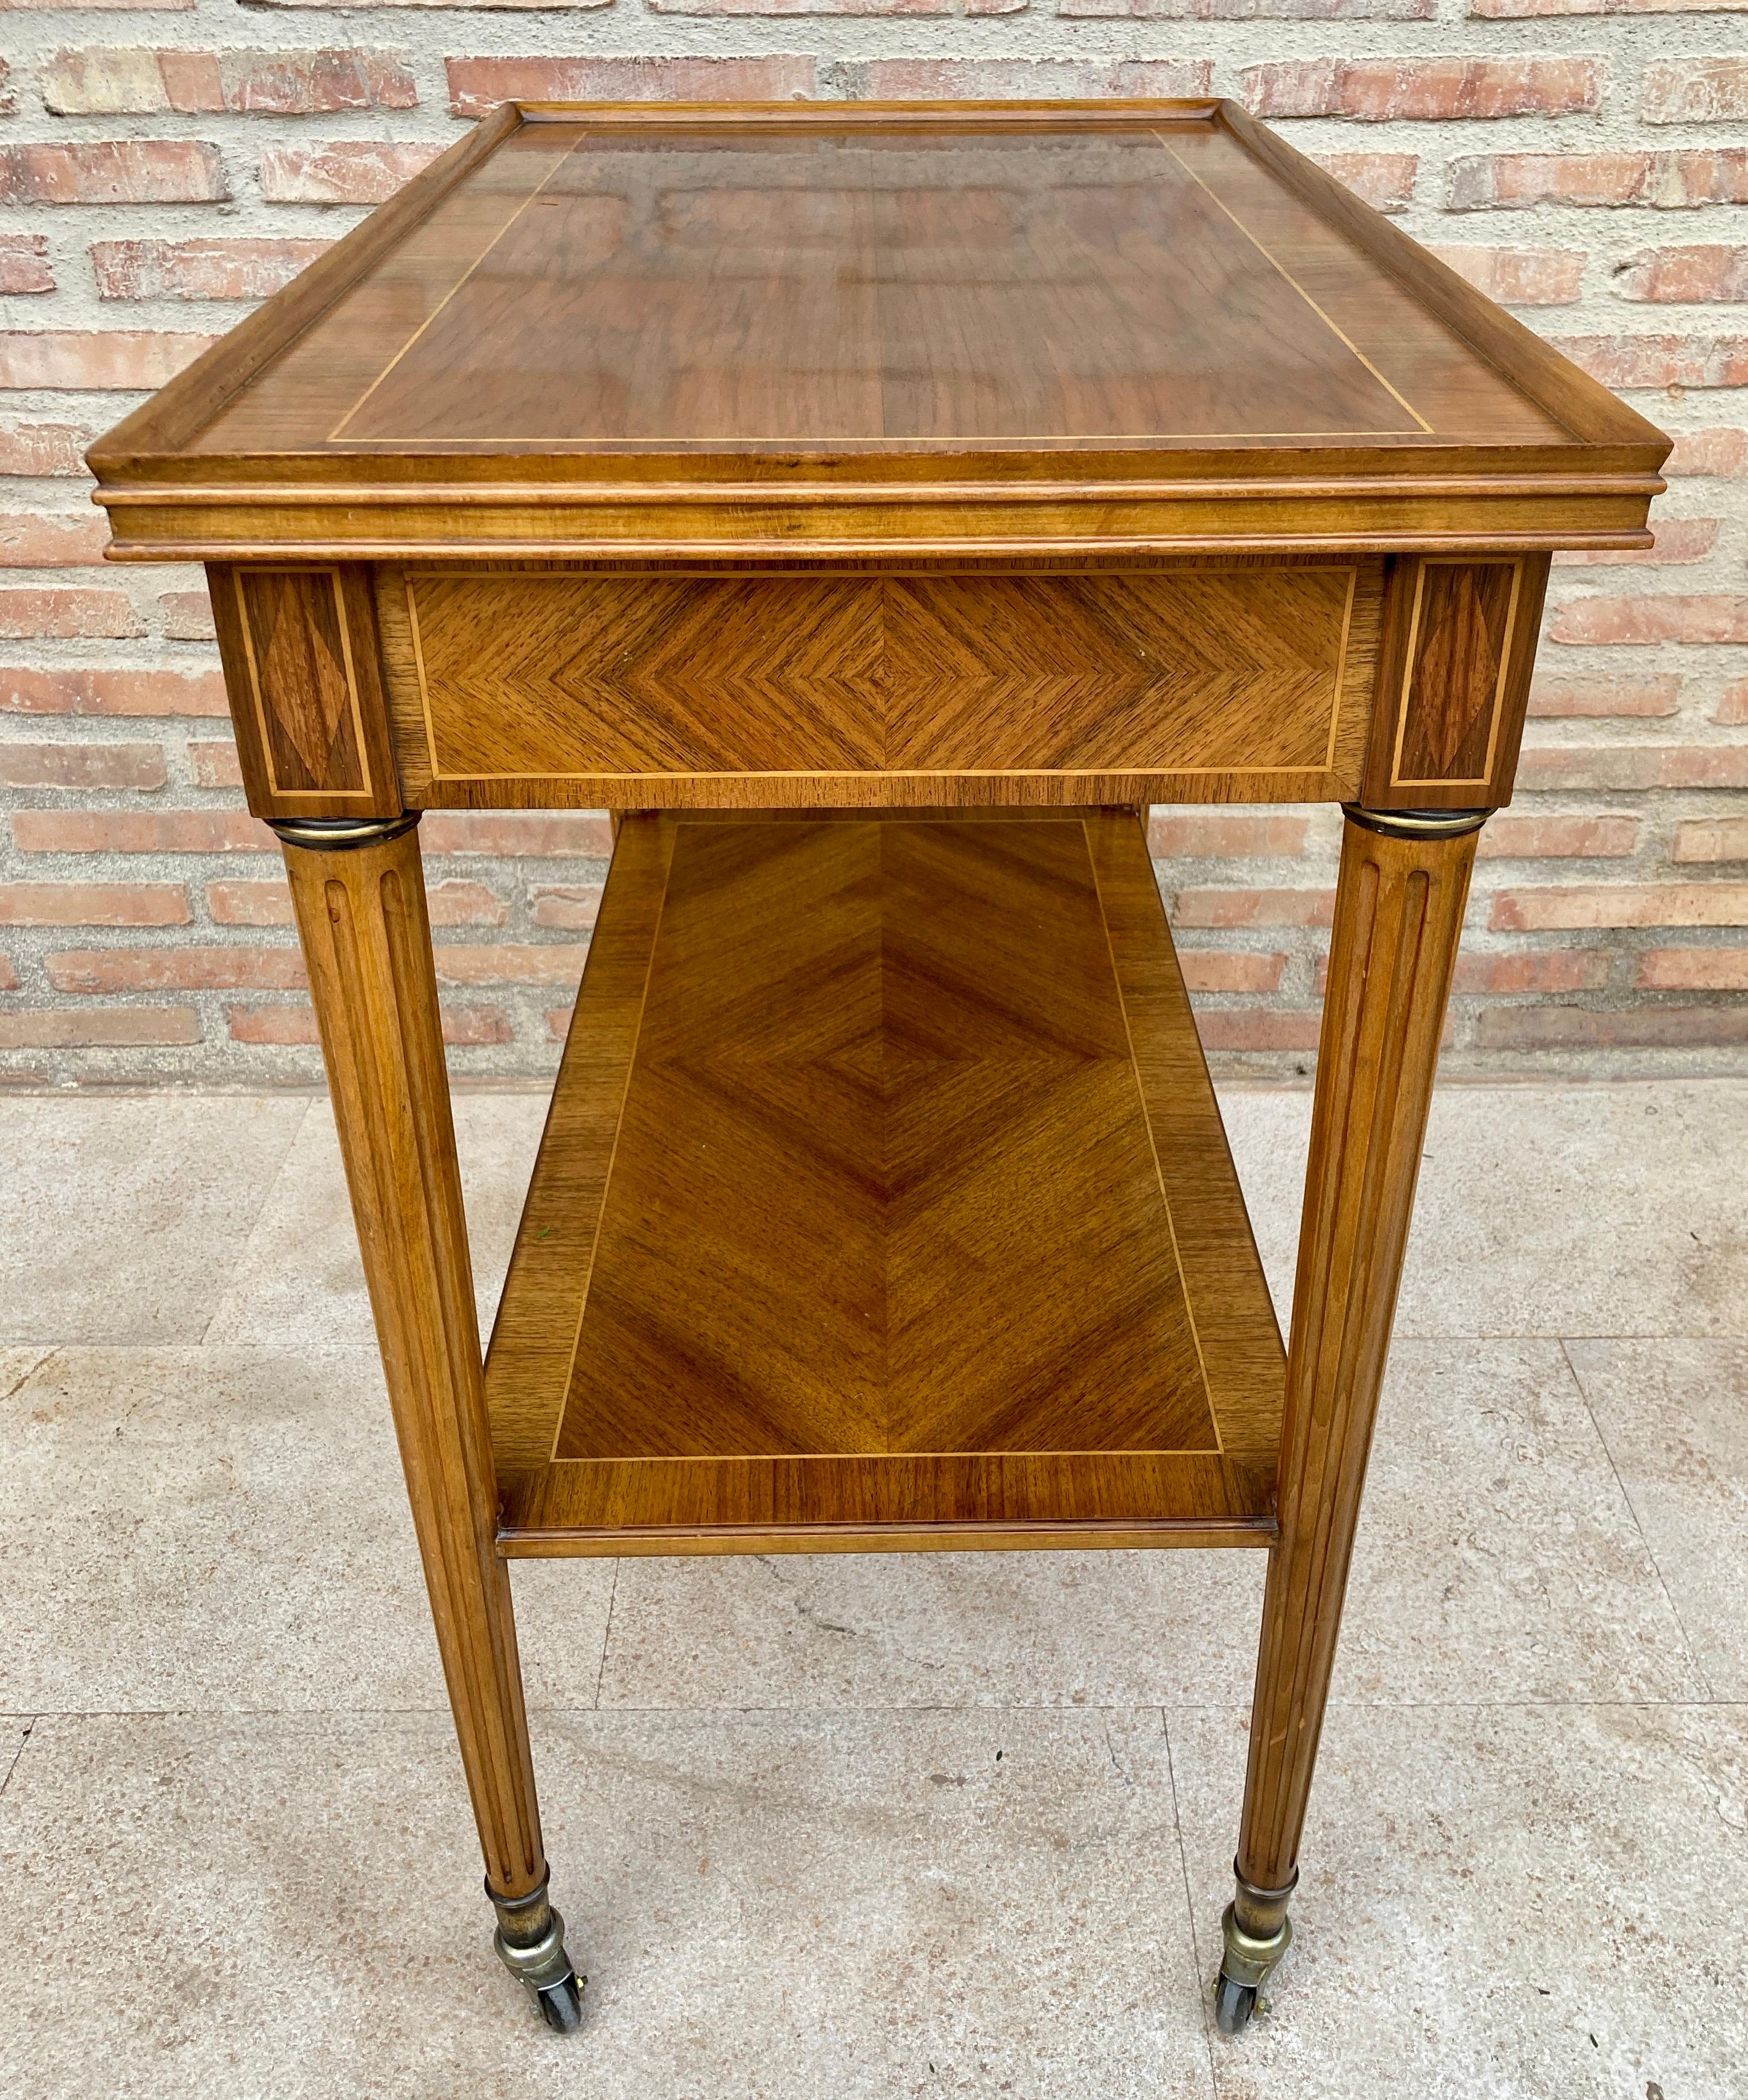 Neoclassic French Marquetry Side Table With One Drawer And Wheels 1940s For Sale 4